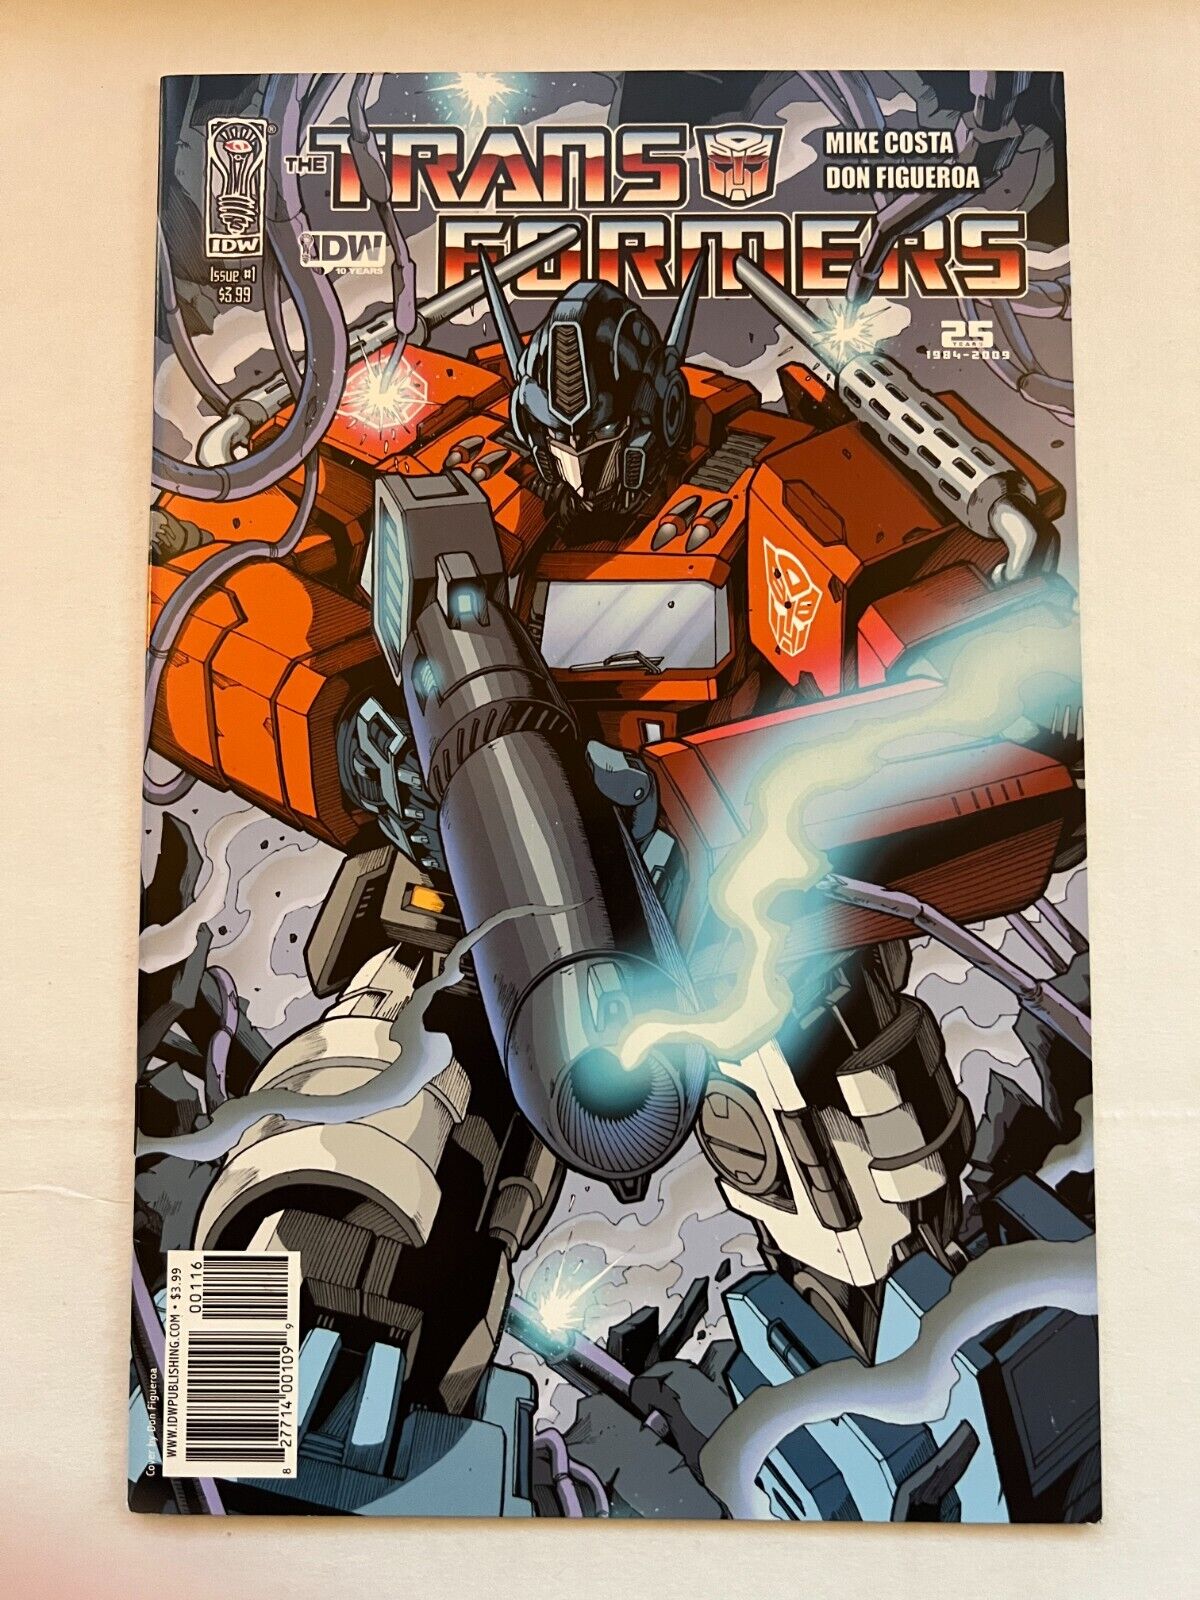 The Transformers #1 (IDW Comics, 2nd Series, 2009) OPTIMUS PRIME Cover